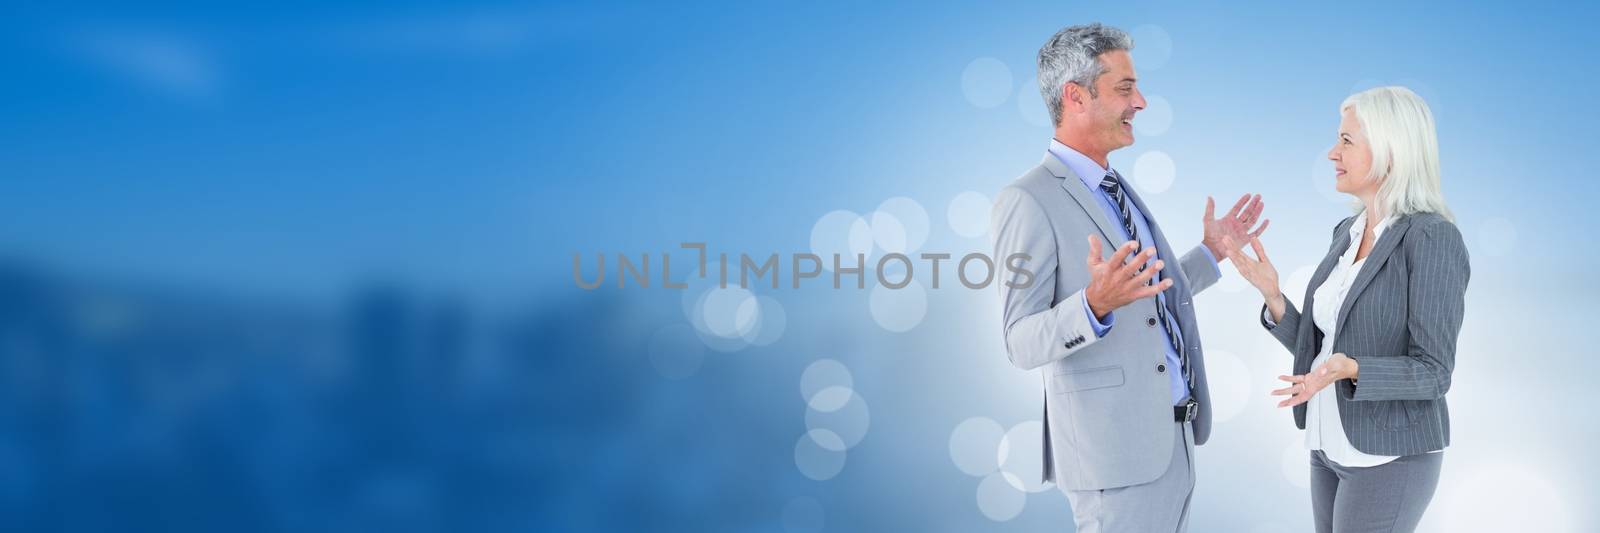 Digital composite of Business people and City buildings with flare light source